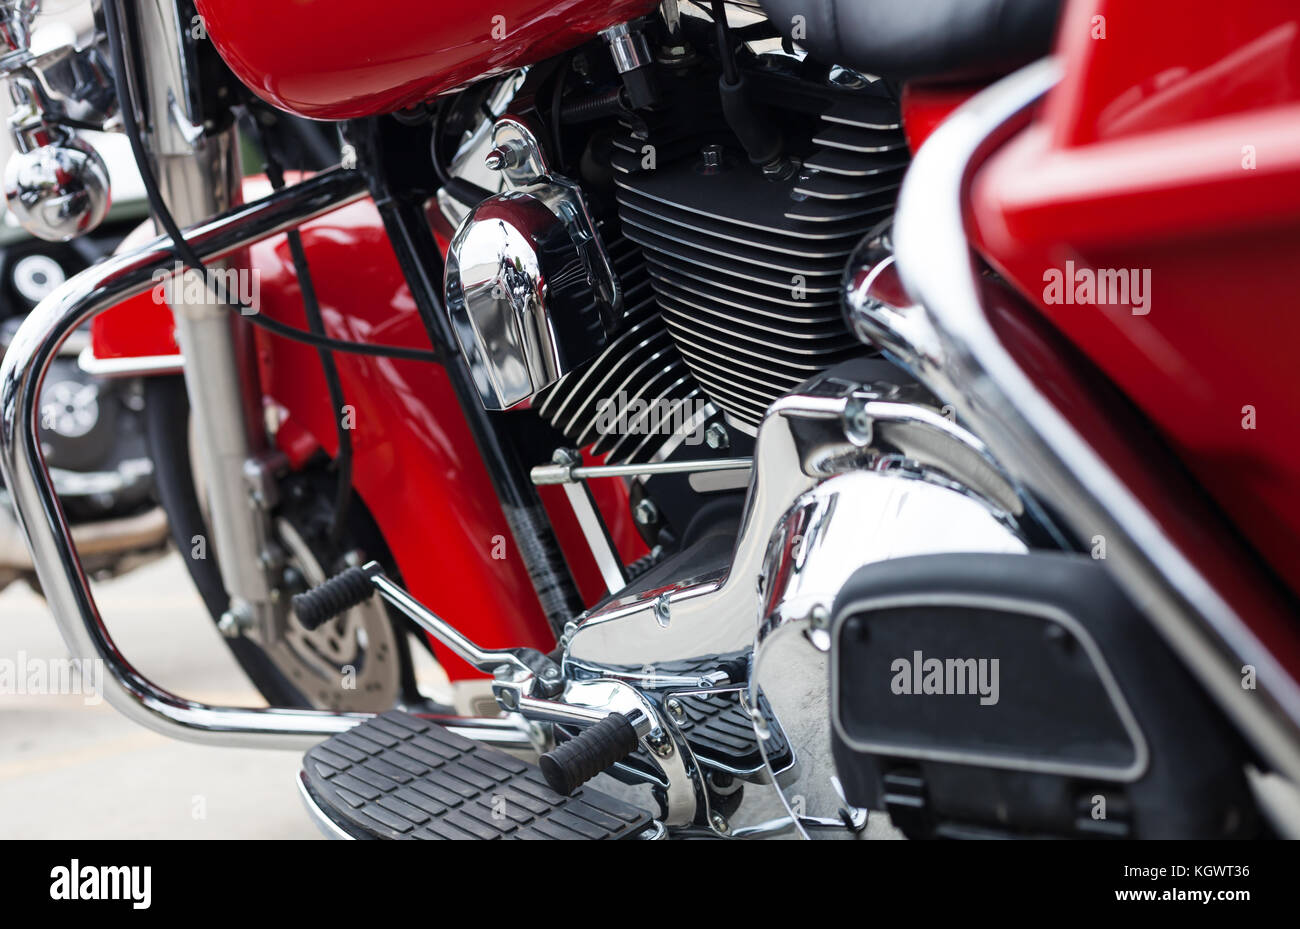 Red motorcycle with chrome engine/ modern red motorcycle with chrome accessories Stock Photo